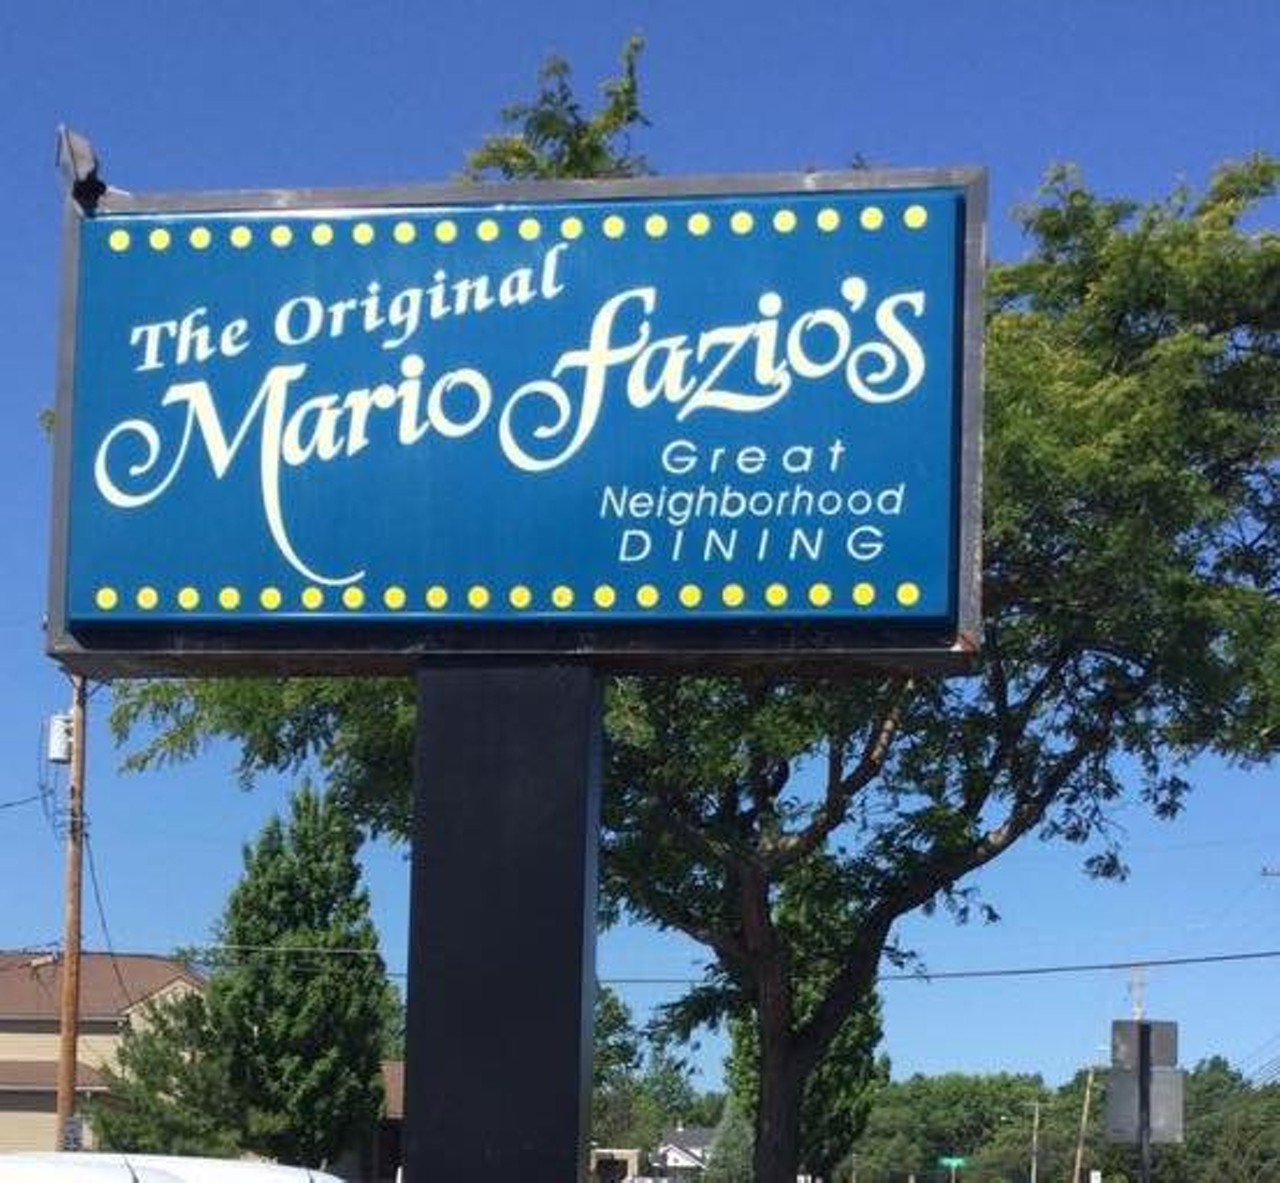  Mario Fazio&#146;s 
34400 Chardon Rd., Willoughby 
Out in Willoughby, this old school Italian joint serves up some of the best pies around. Try their house specialty, the Annie, that comes with Italian sausage, spinach and caramelized onions.
Photo via  Mario Fazio&#146;s/Facebook